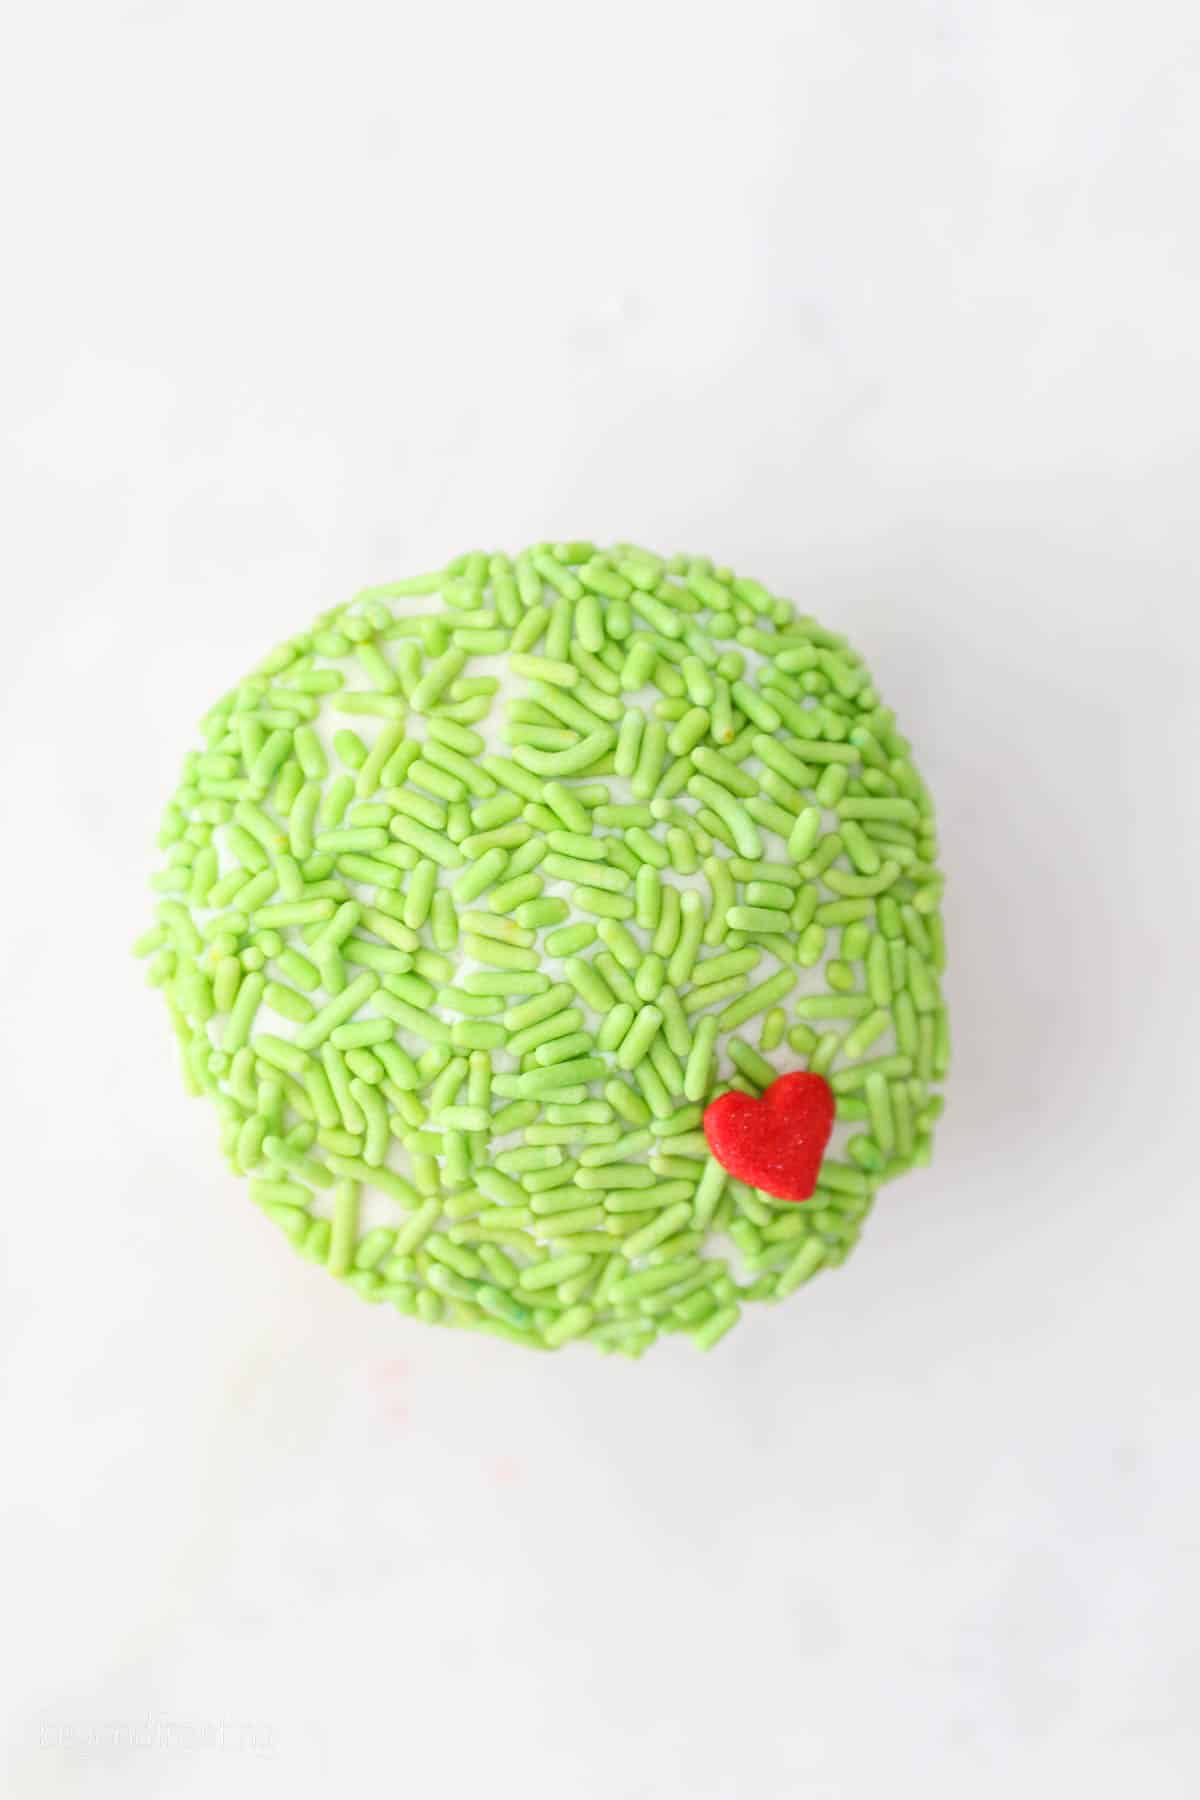 Overhead view of a cupcake decorated to look like the Grinch.